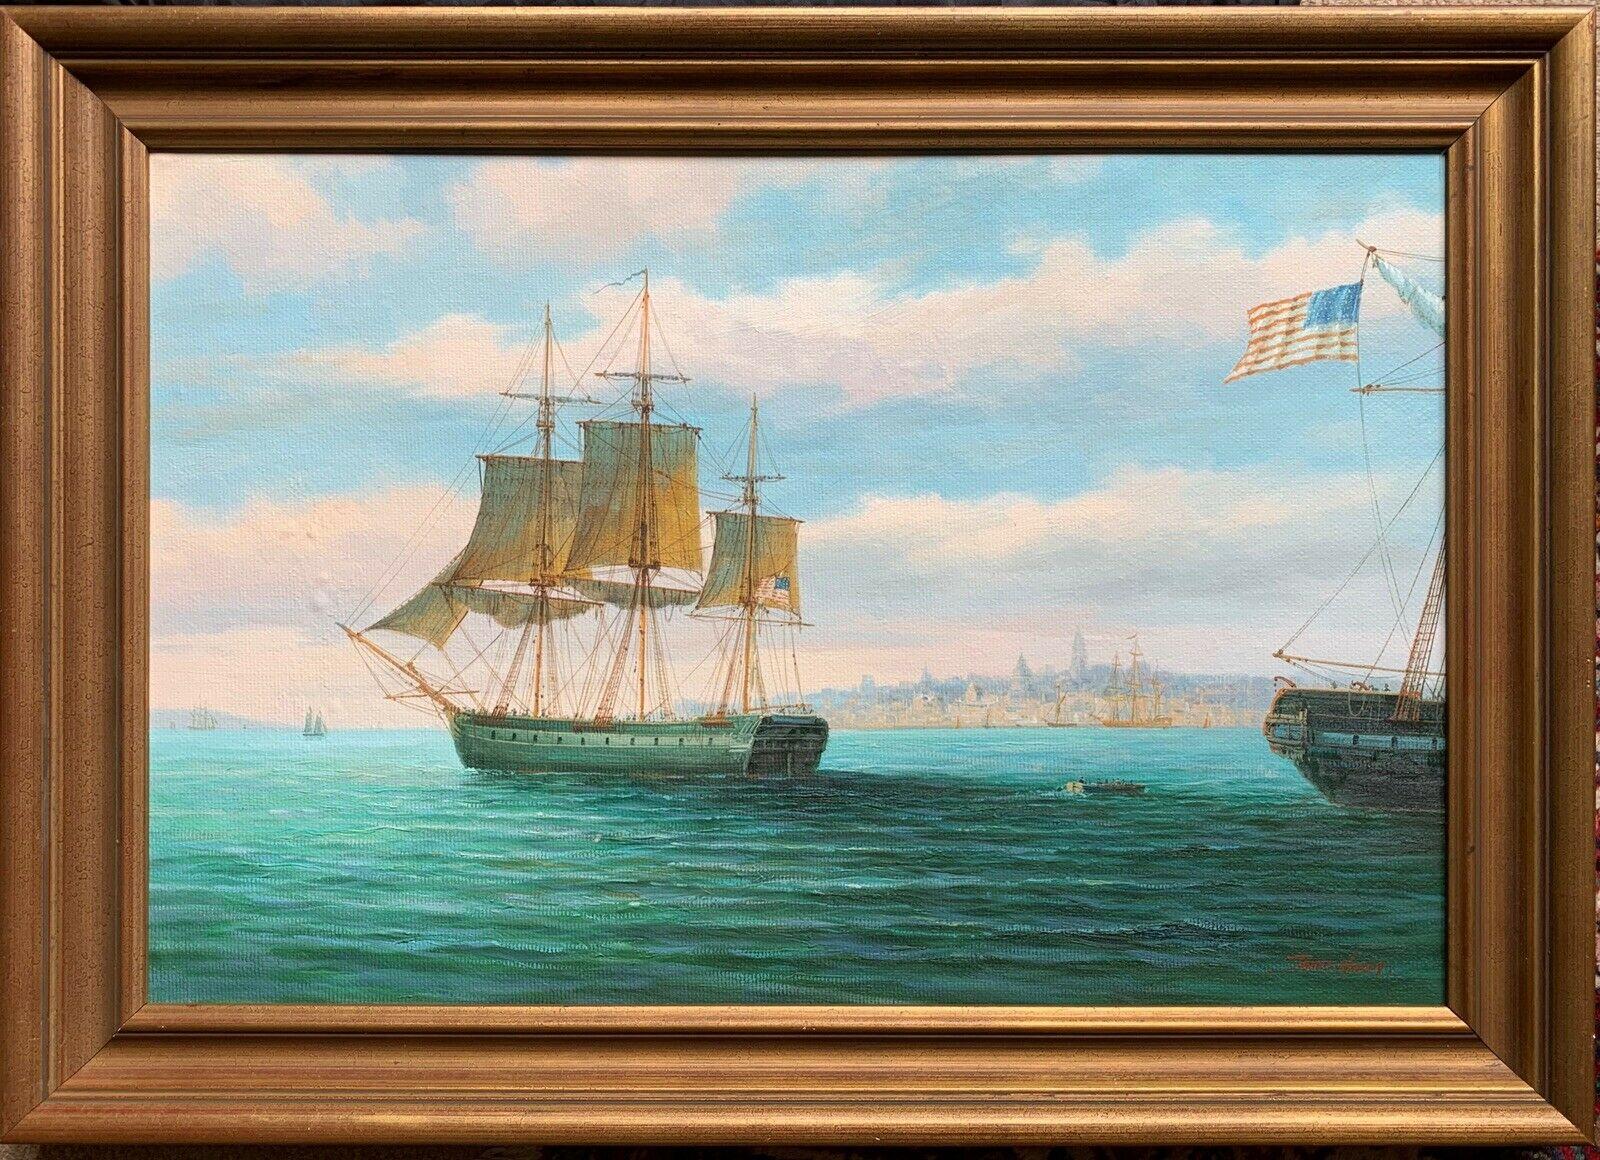 JAMES HARDY - LARGE SIGNED OIL - 19thC AMERICAN FRIGATE SHIPS OFF CITY COASTLINE - Painting by James Hardy